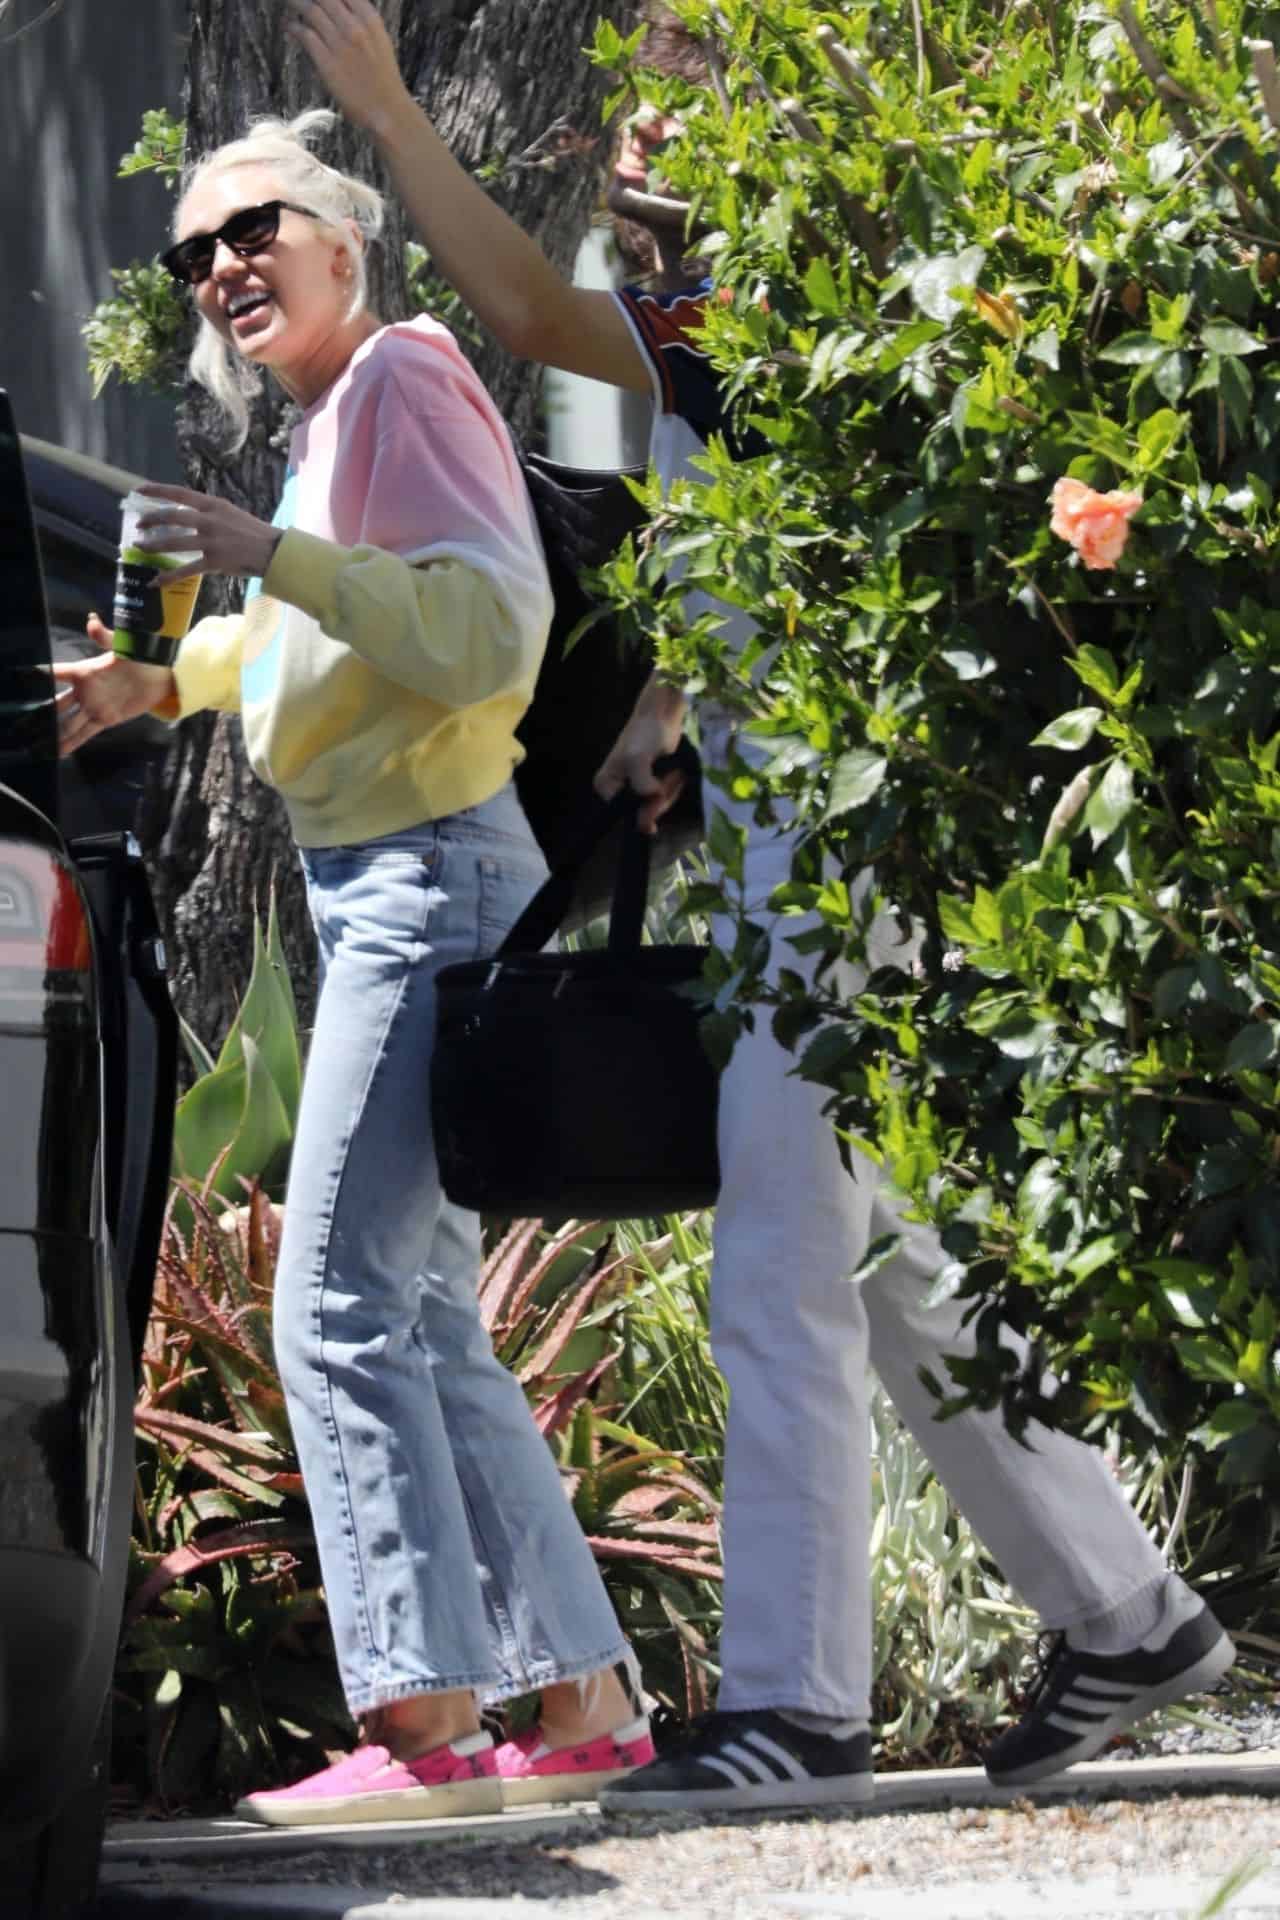 Miley Cyrus Rocks a Casual Look while Leaving the Studio with Maxx Morando